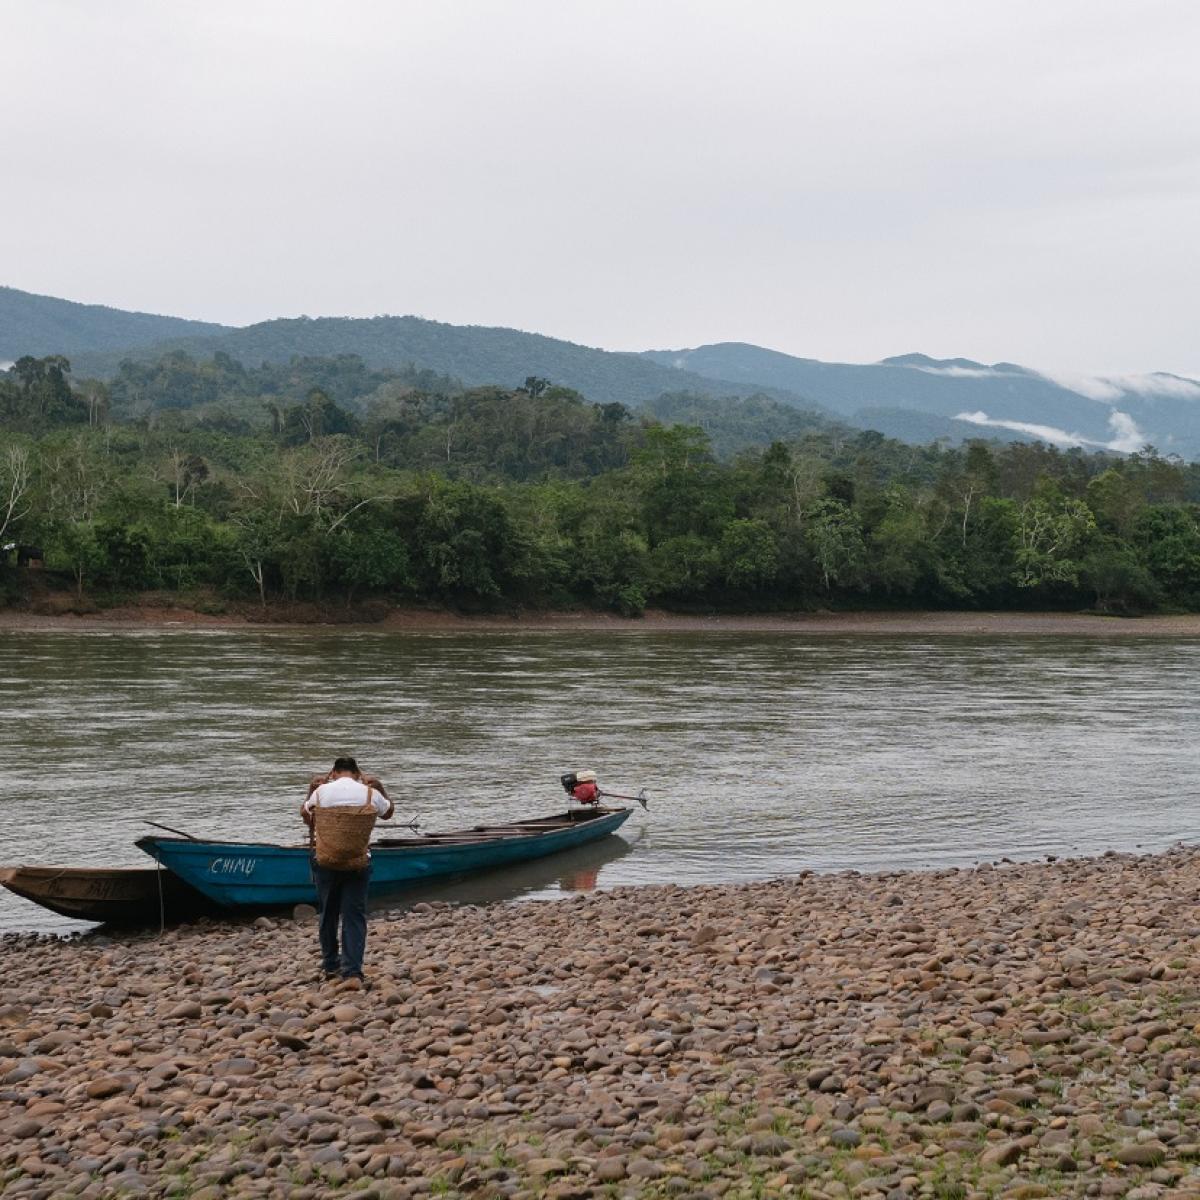 A man walks along a rocky river bank, approaching a small skiff boat.